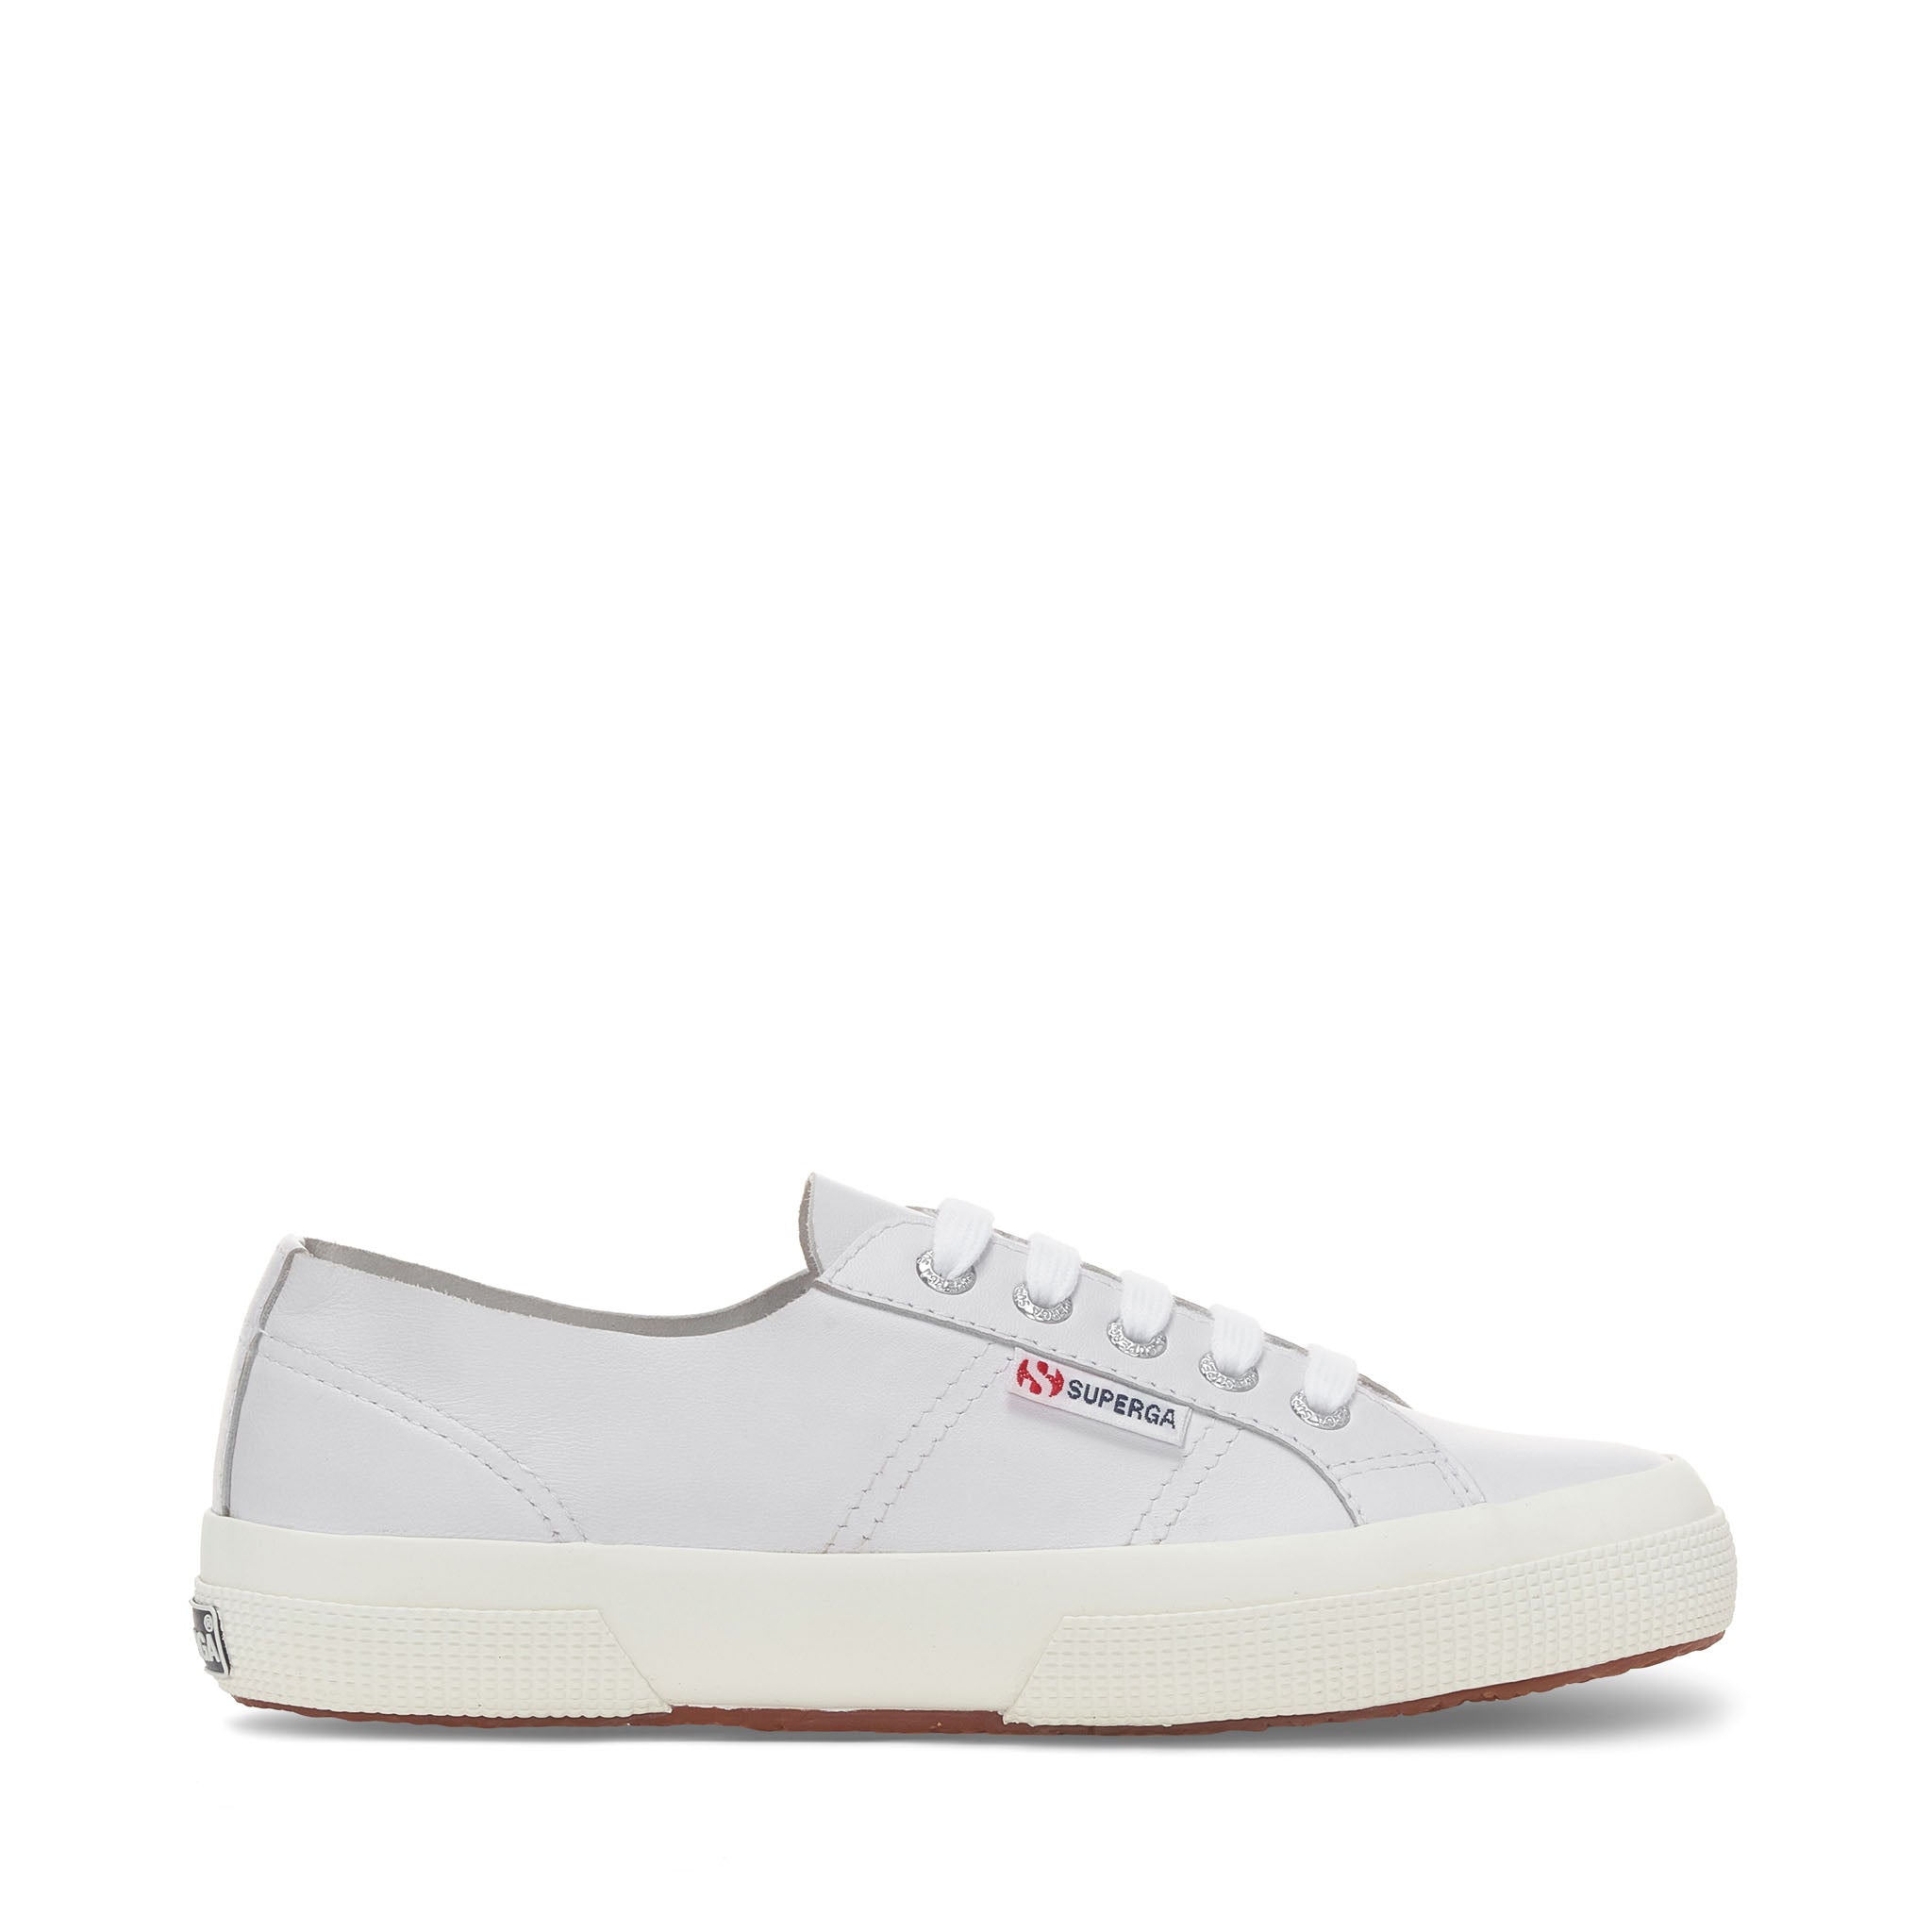 Superga 2750 Unlined Nappa Sneakers - Optical White. Side view.